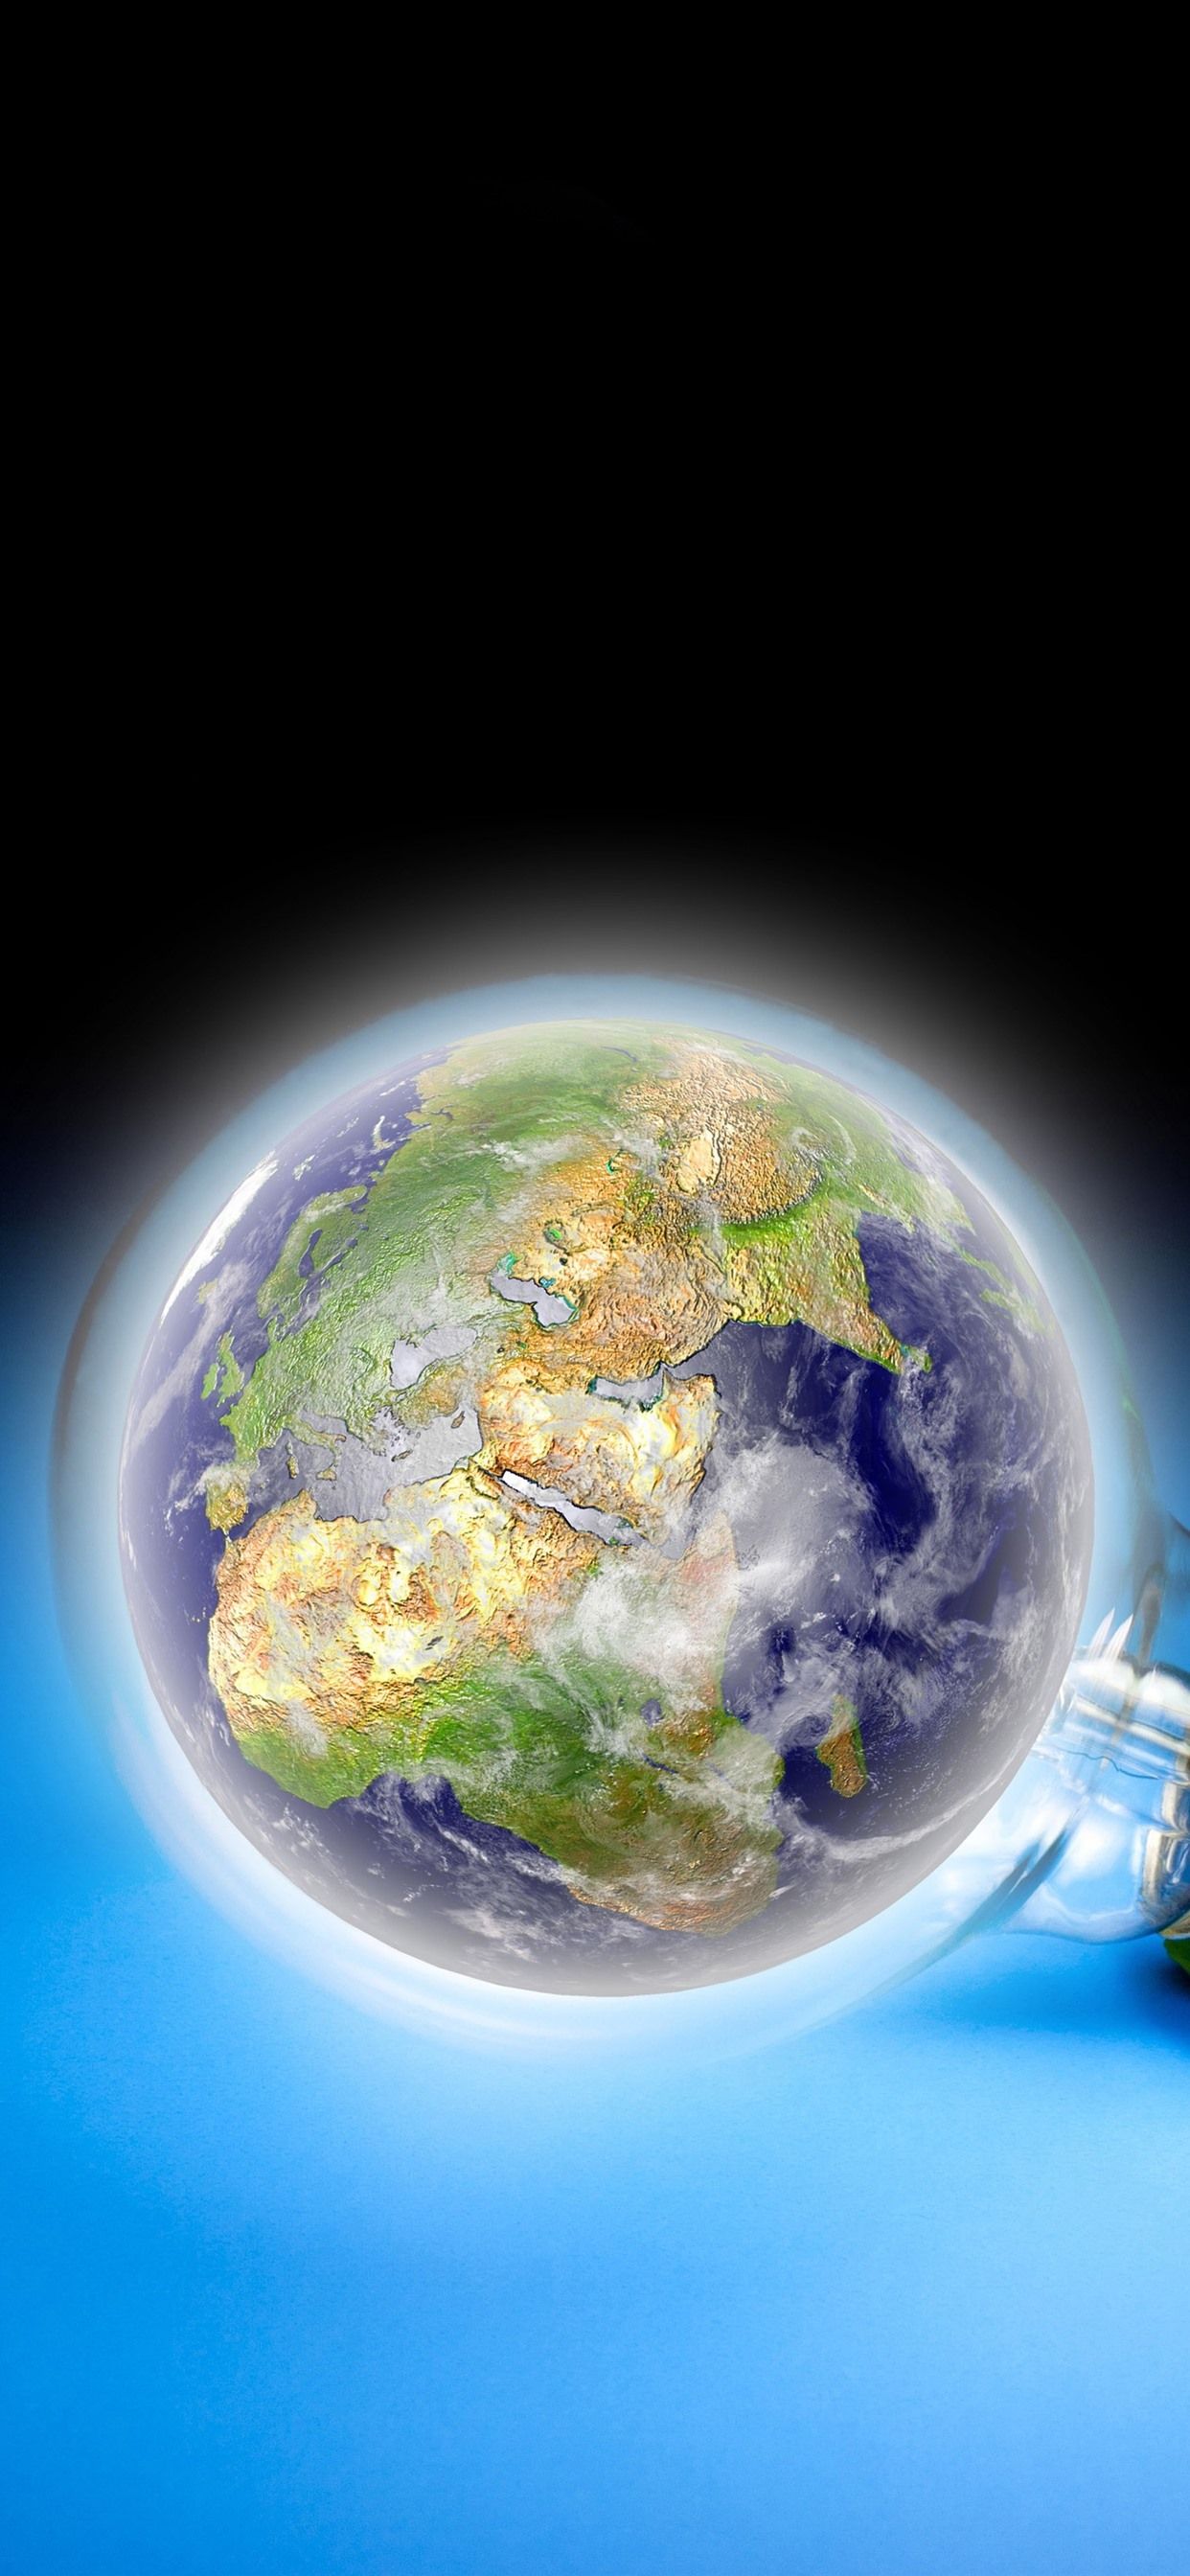 Light bulb, Earth, blue background, creative picture 1242x2688